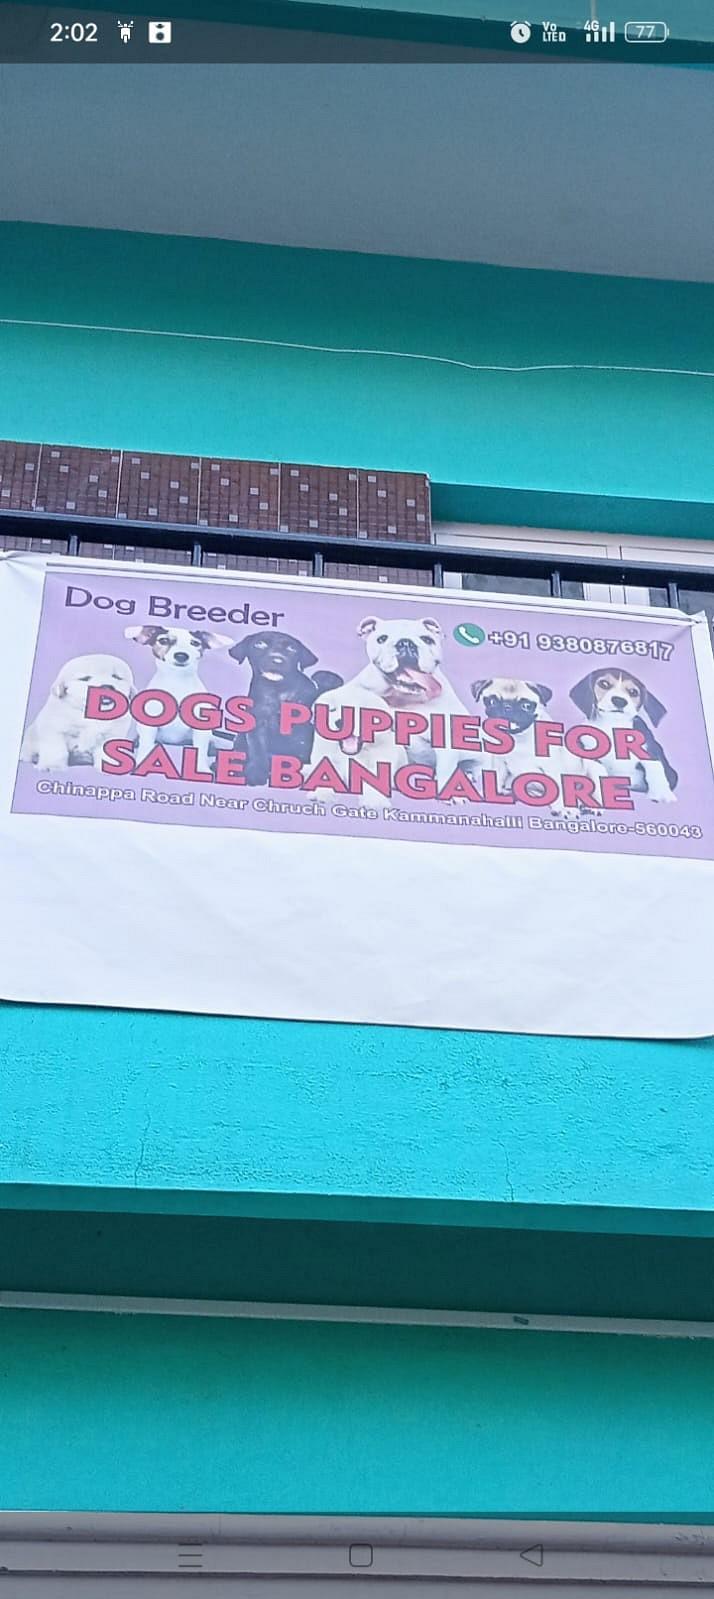 Dog puppies sale bangalore cover